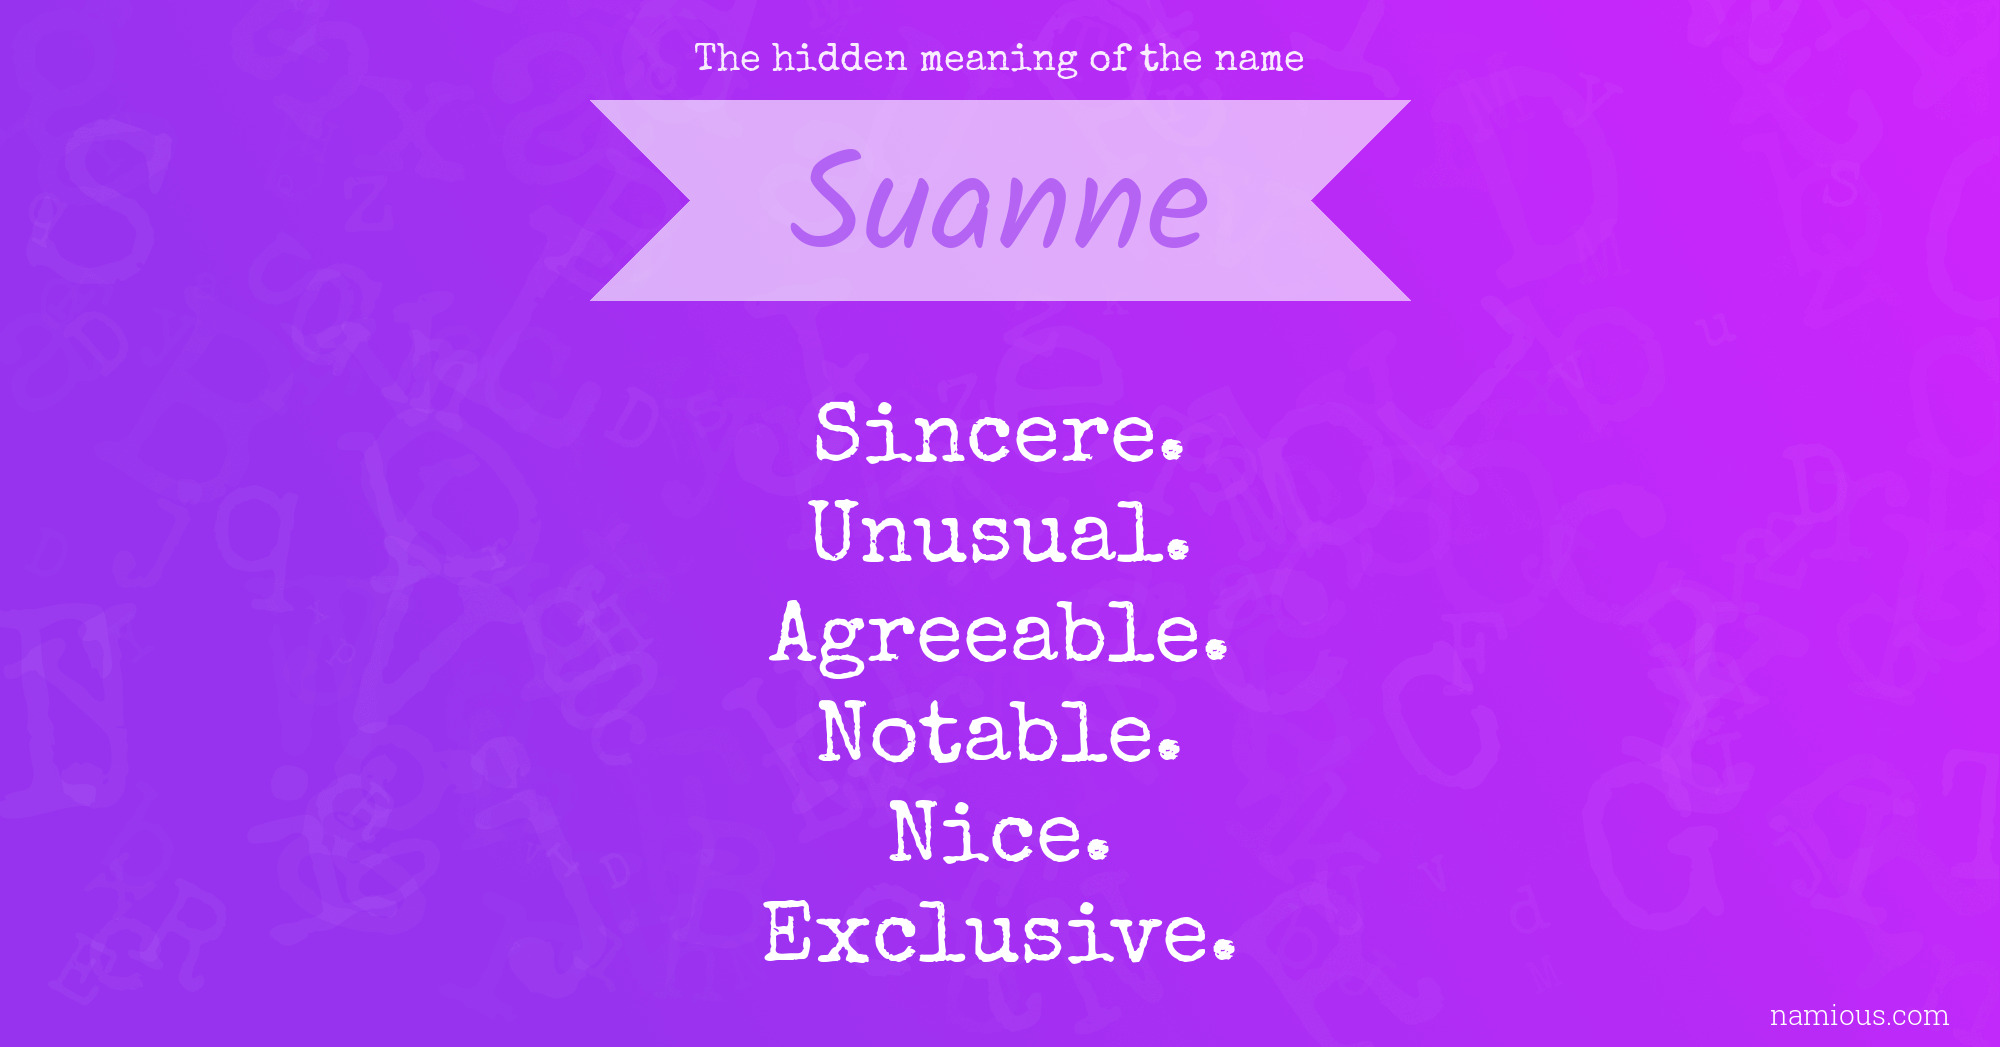 The hidden meaning of the name Suanne